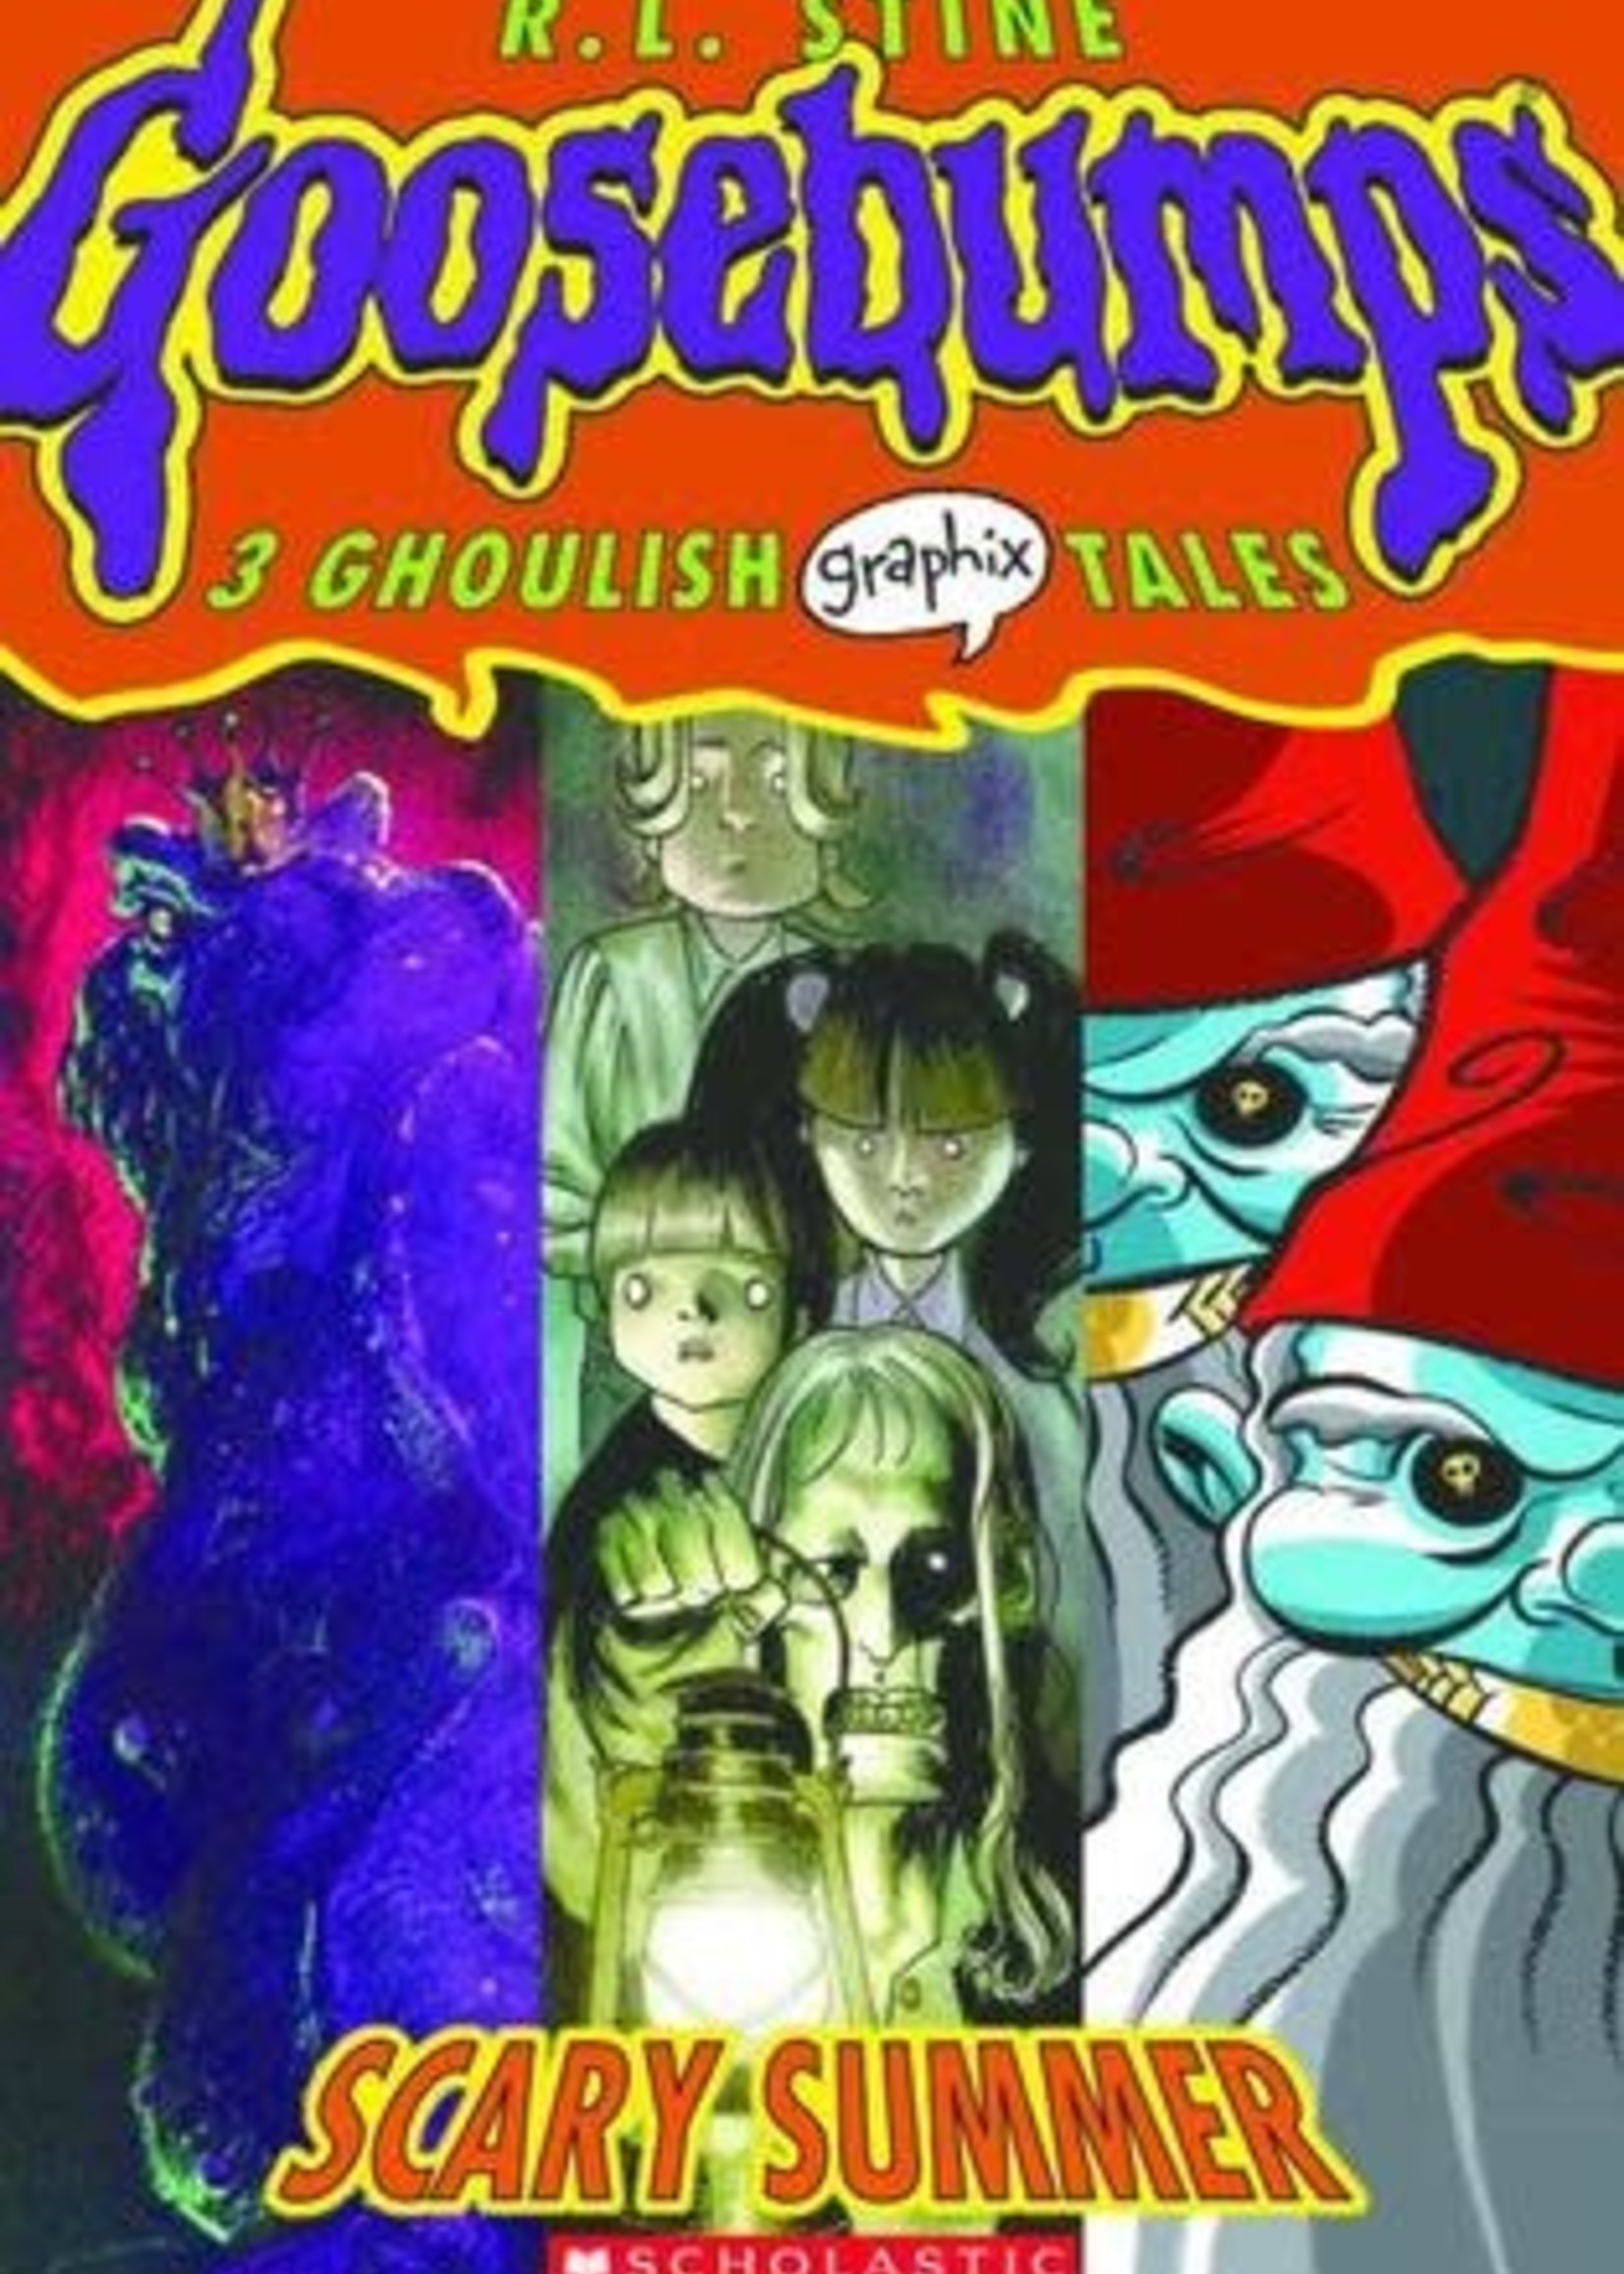 Scary Summer (Goosebumps Graphix #3) by R.L. Stine